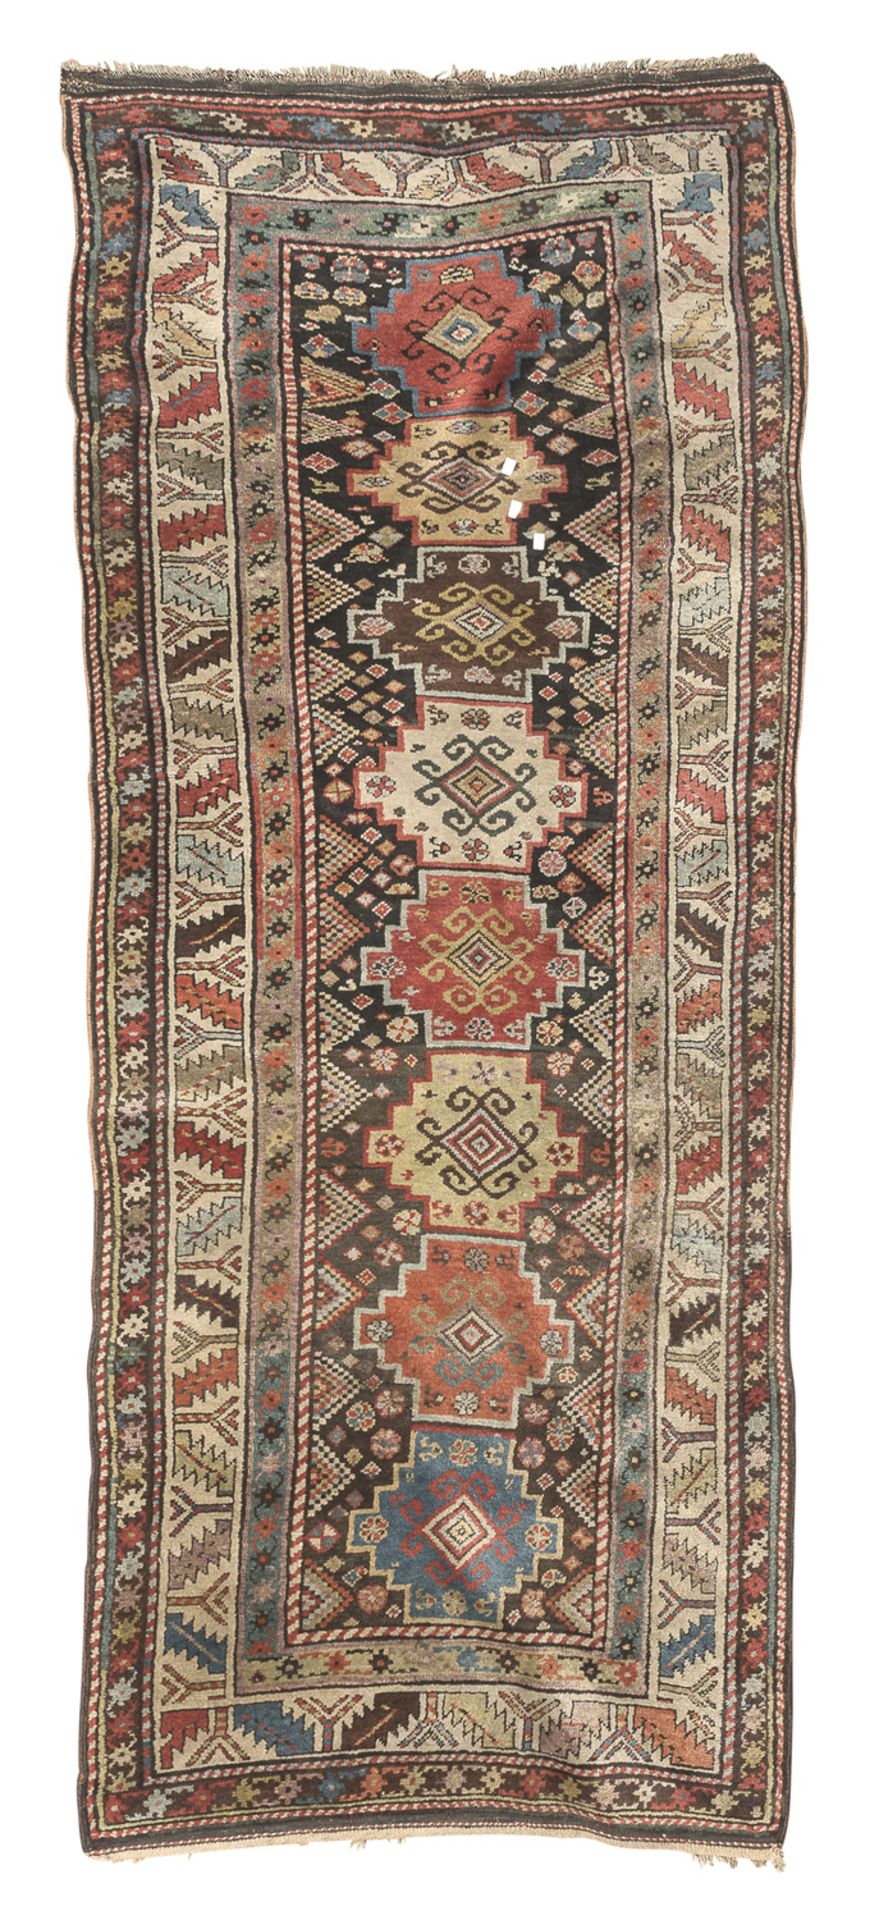 SMALL KAZAK RUNNER WITH HOOKED POLYGONS EARLY 20TH CENTURY